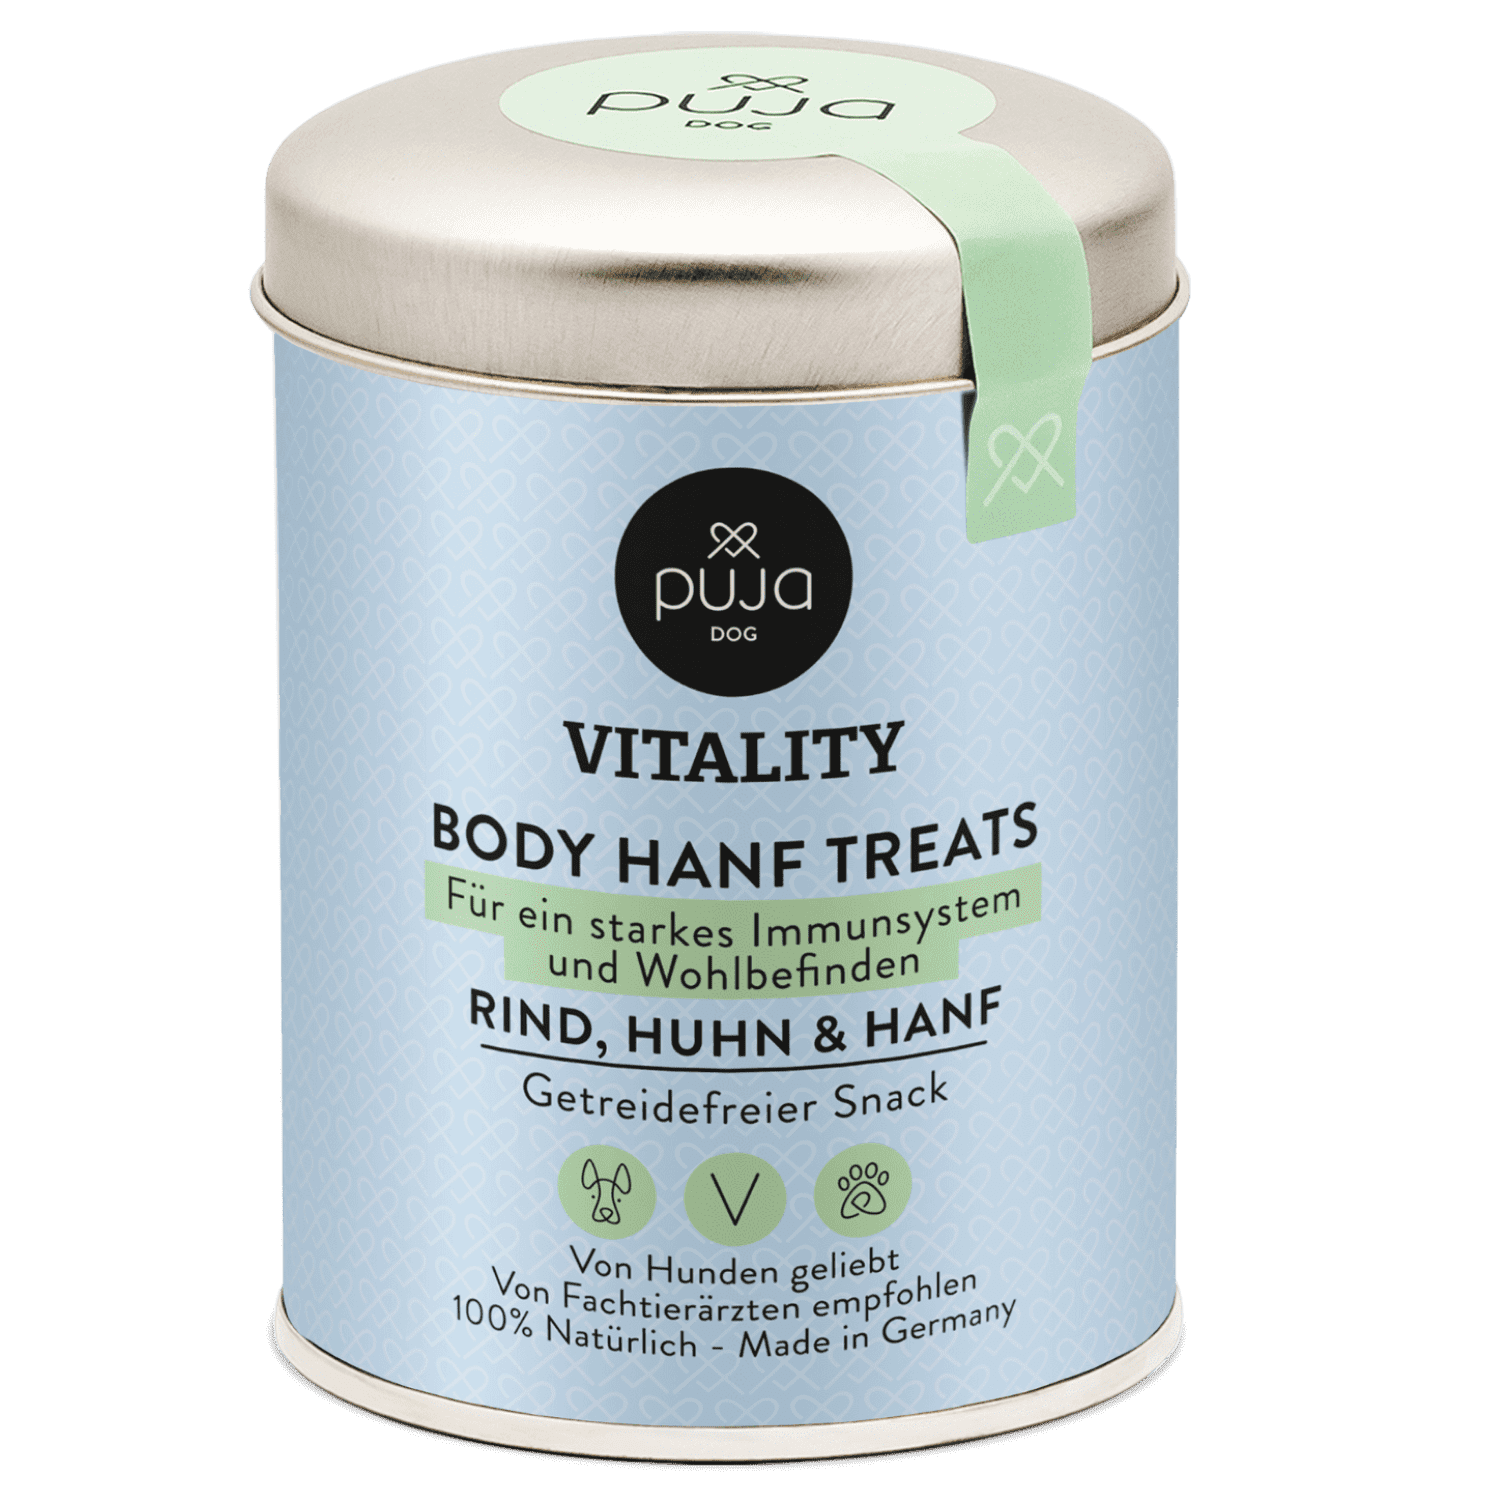 Vitality Body with hemp for dogs - immune system booster & well-being 150g